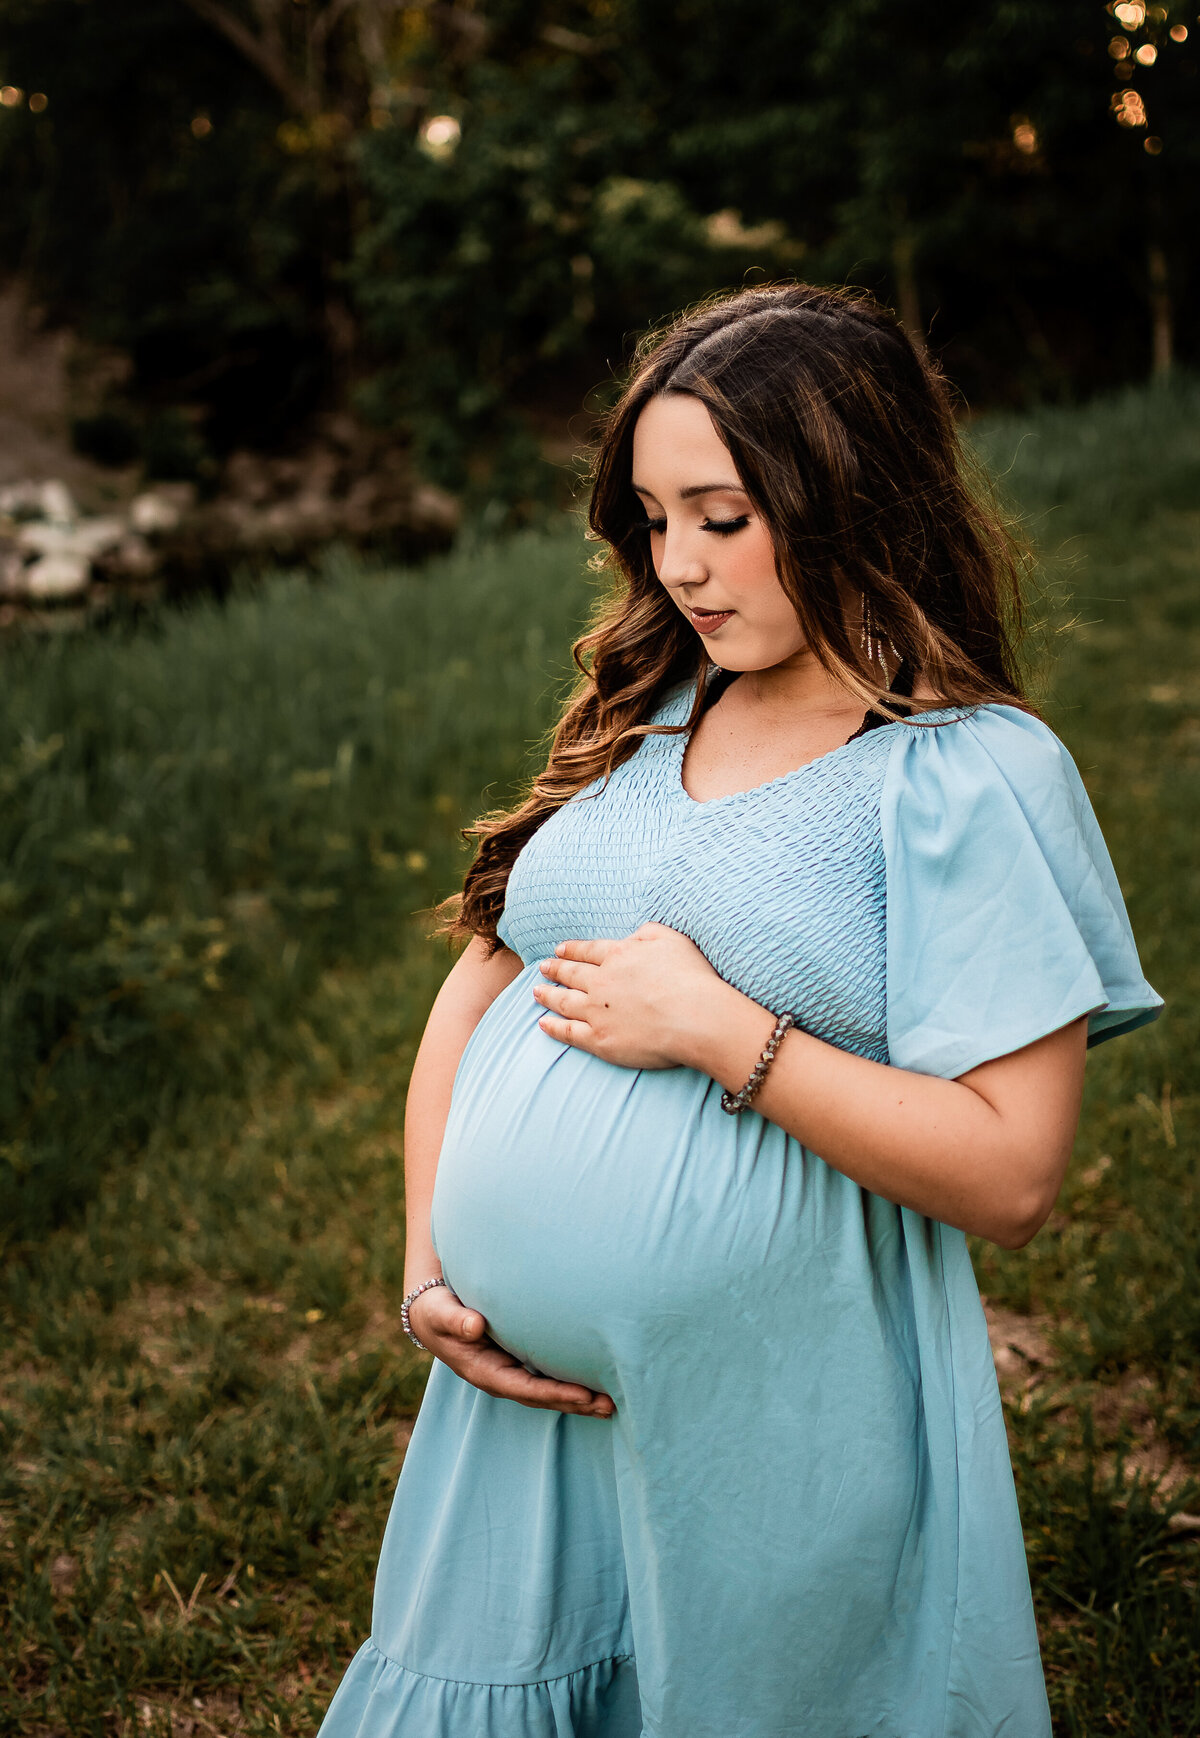 At a Brazoria county park, a mom to be wearing a blue dress holds her belly.